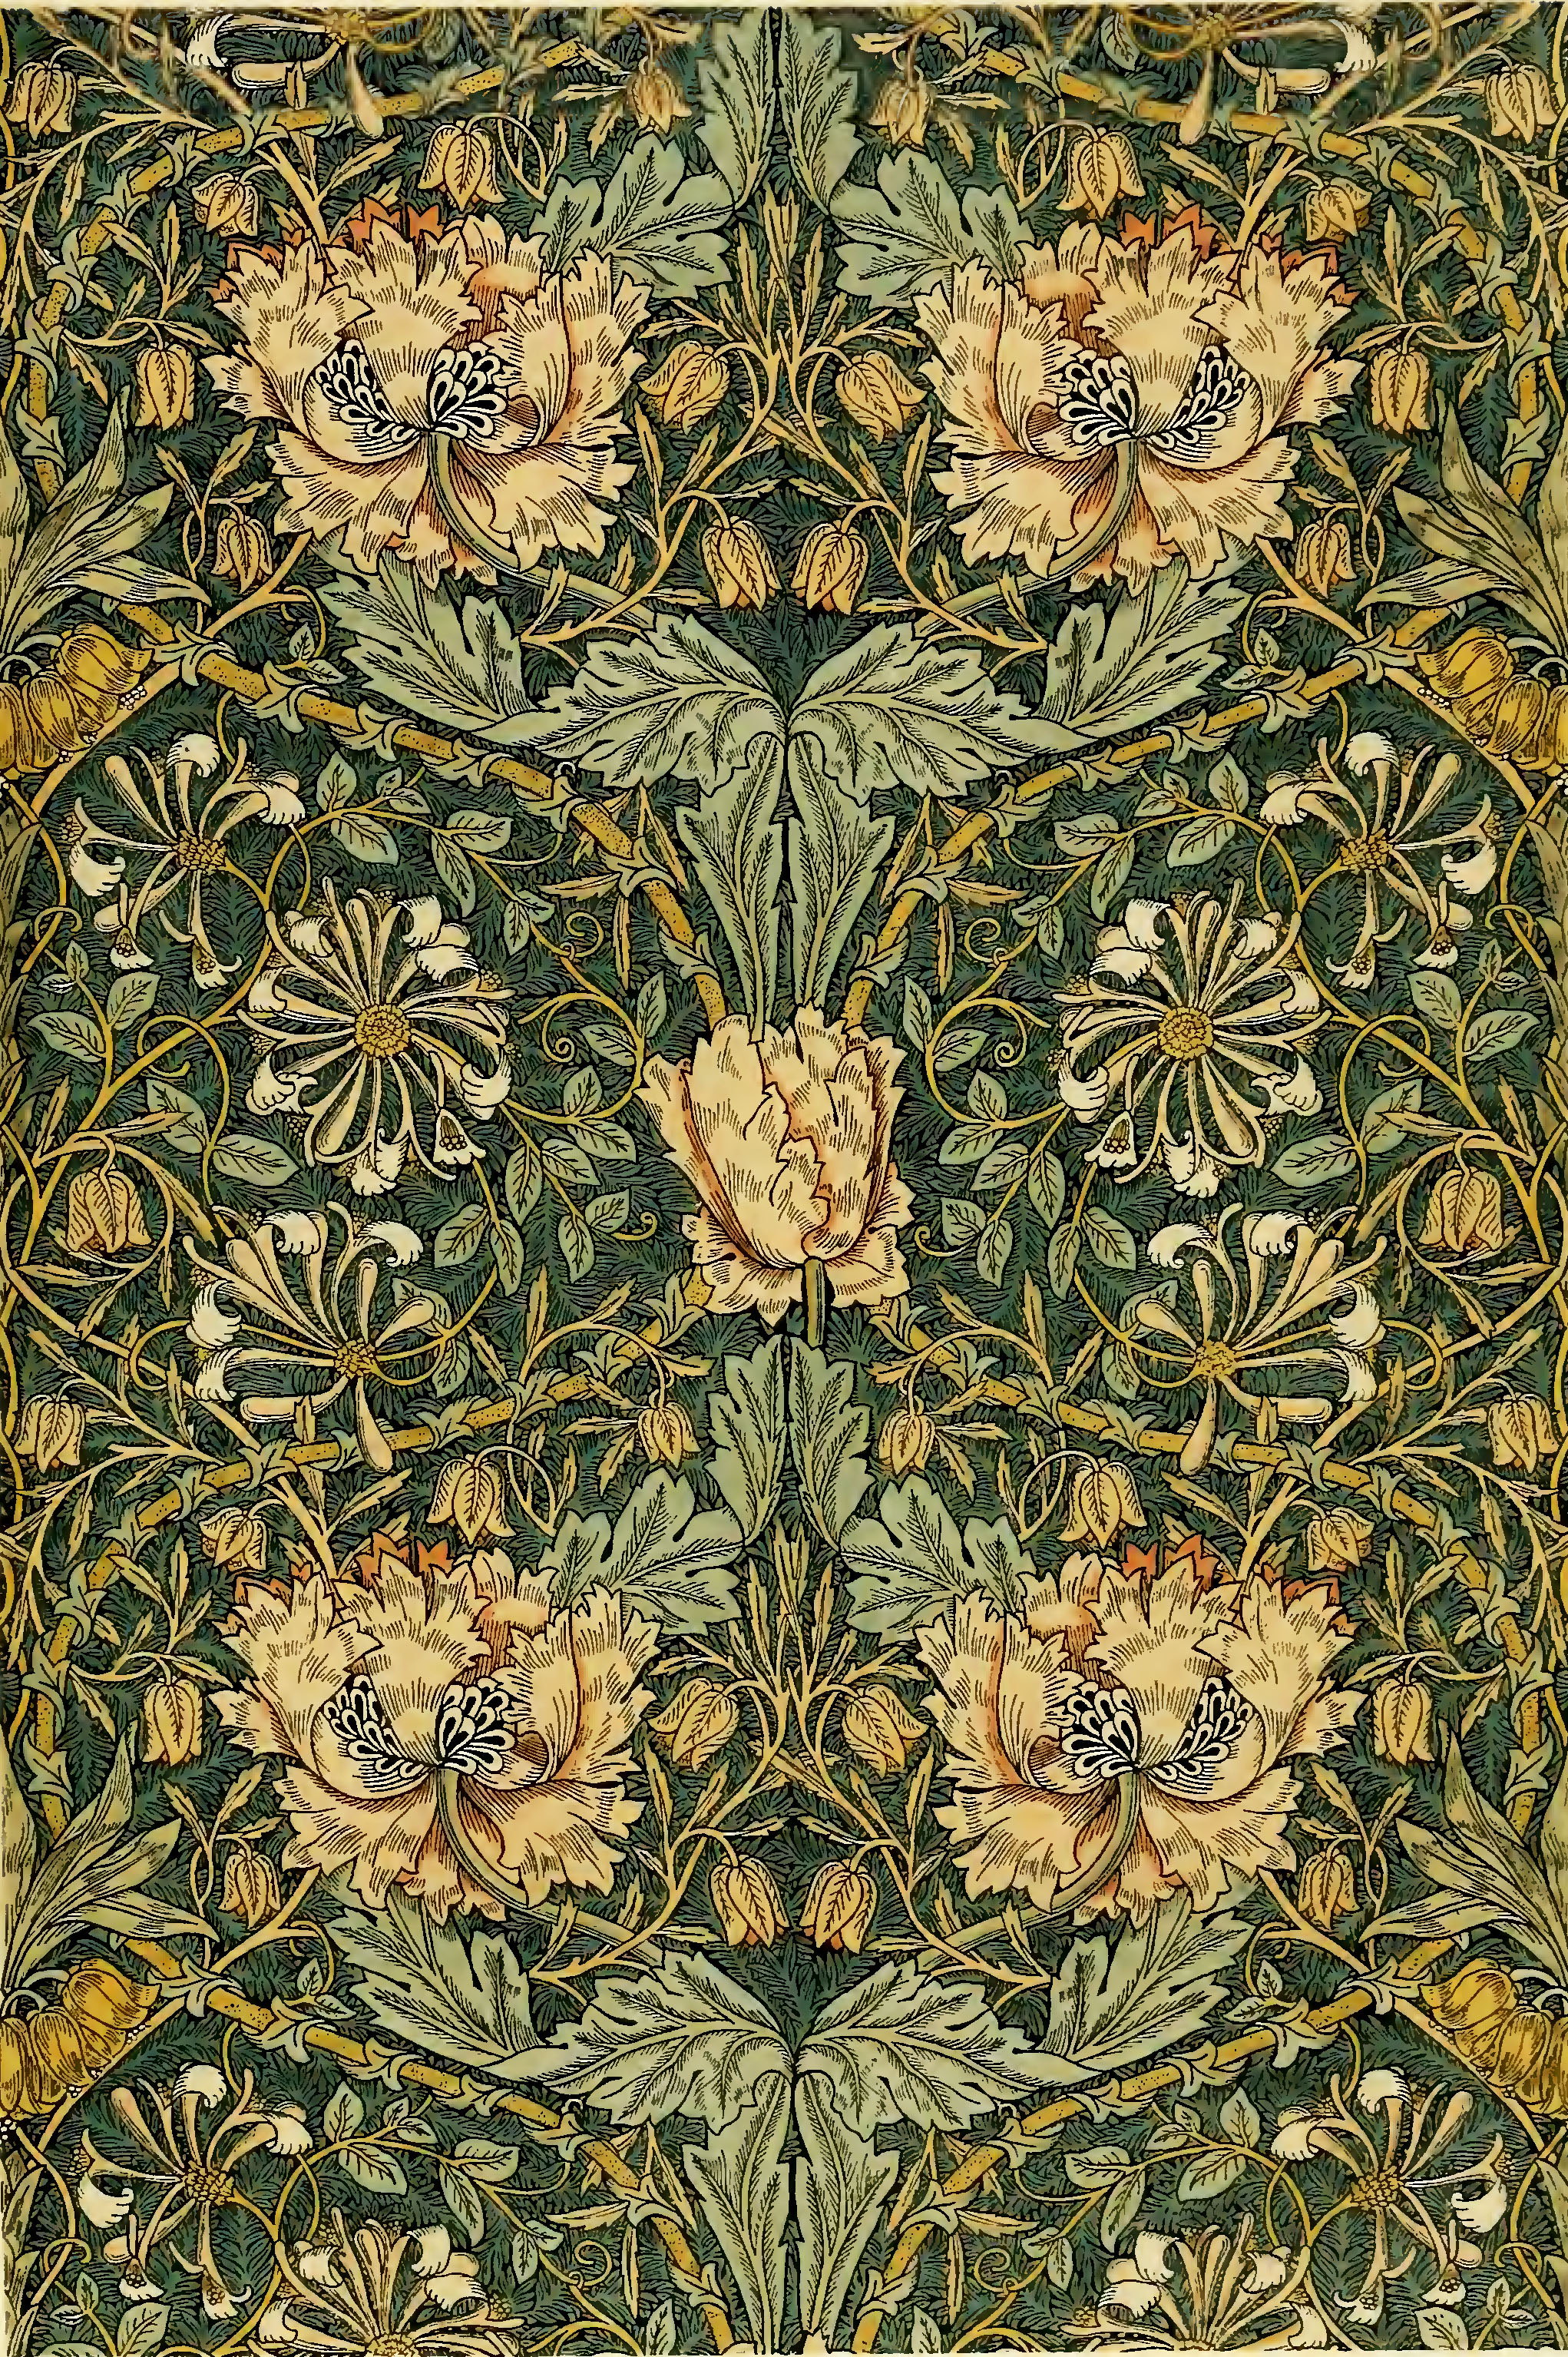 William Morris Seaweed pattern Victorian Blue  Green Floral  Leaves  Art Nouveau vintage wallpaper Morris arts and crafts William Morris  artist textile pattern Poster for Sale by Tamas Das  Redbubble